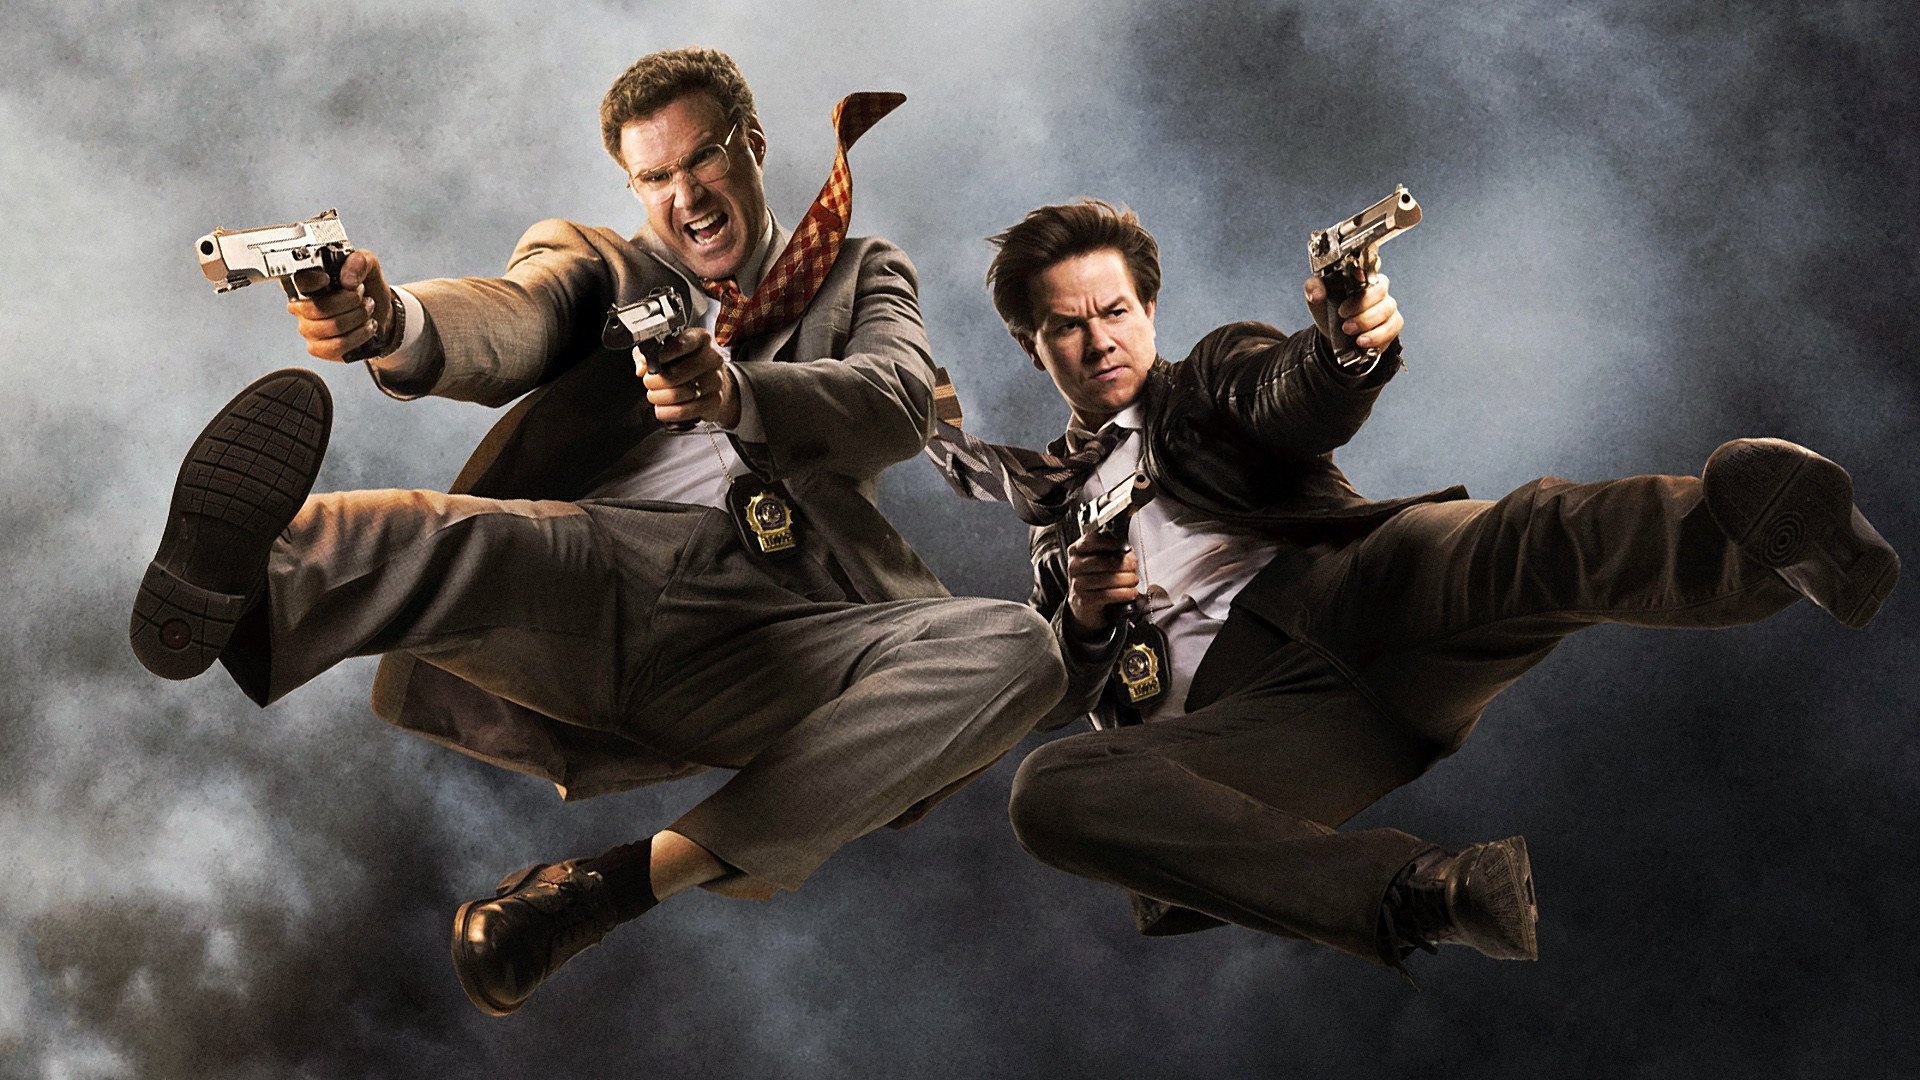 Will Ferrell, The Other Guys, HD wallpapers, Background images, 1920x1080 Full HD Desktop